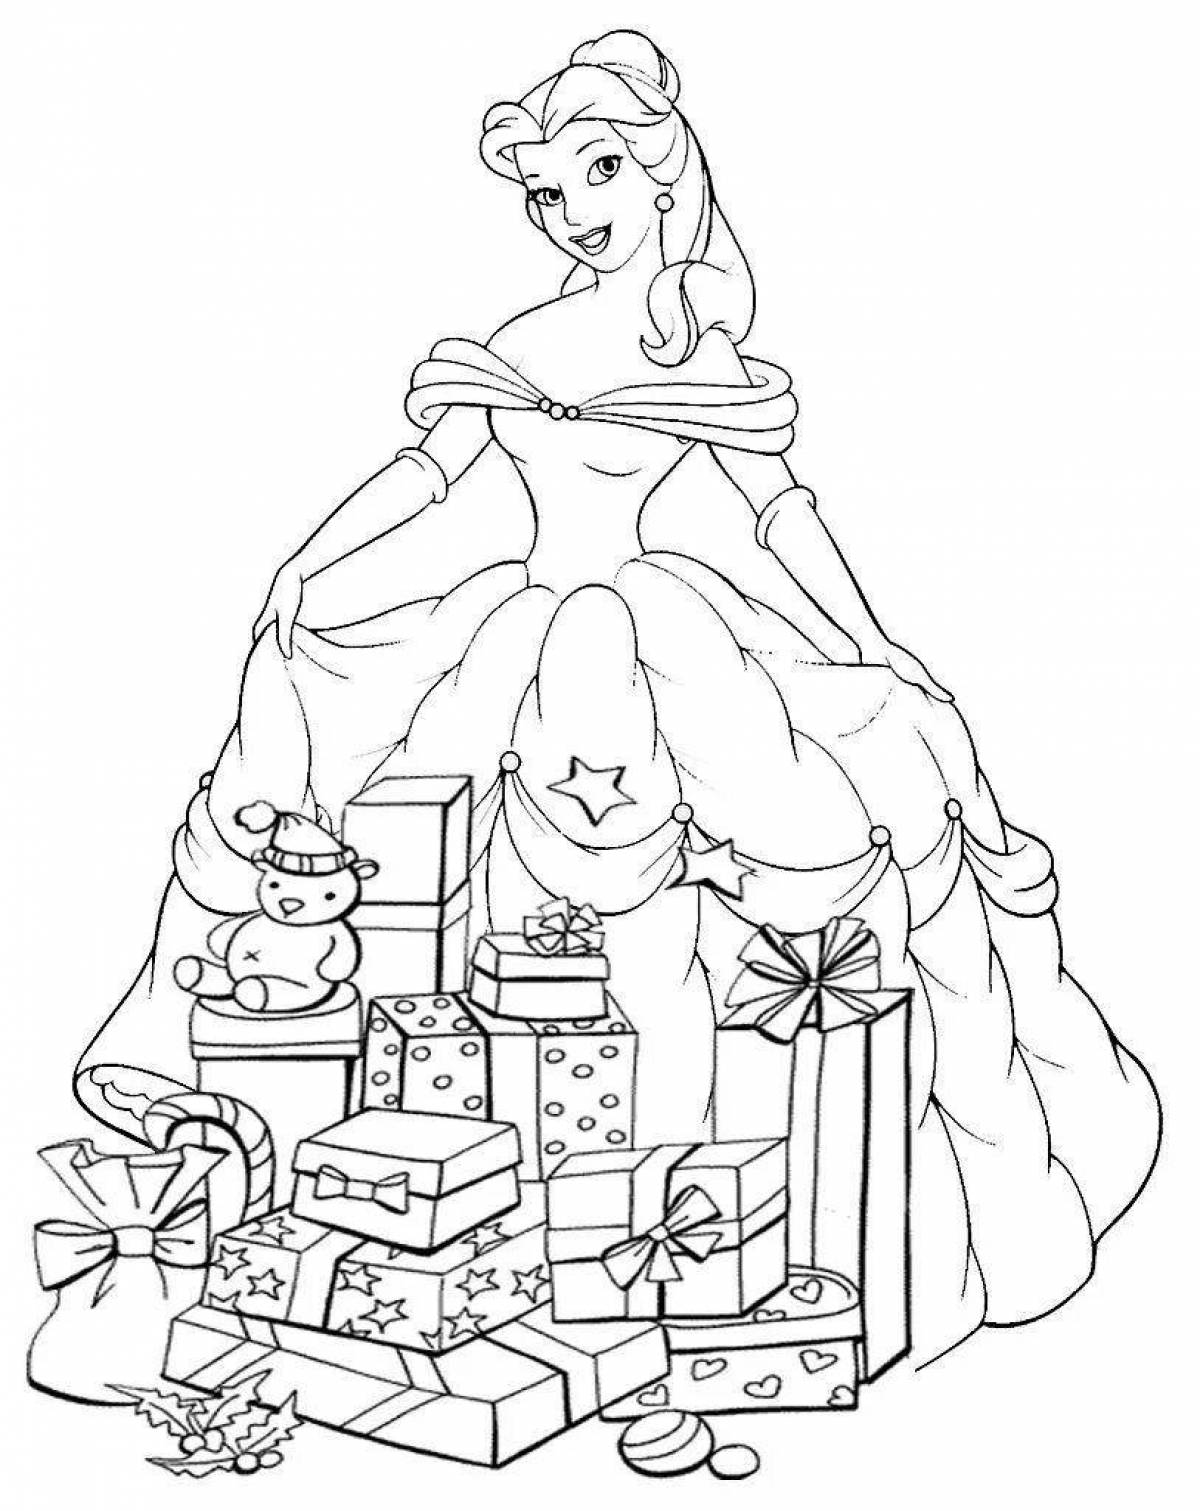 Dazzling princess coloring pages new